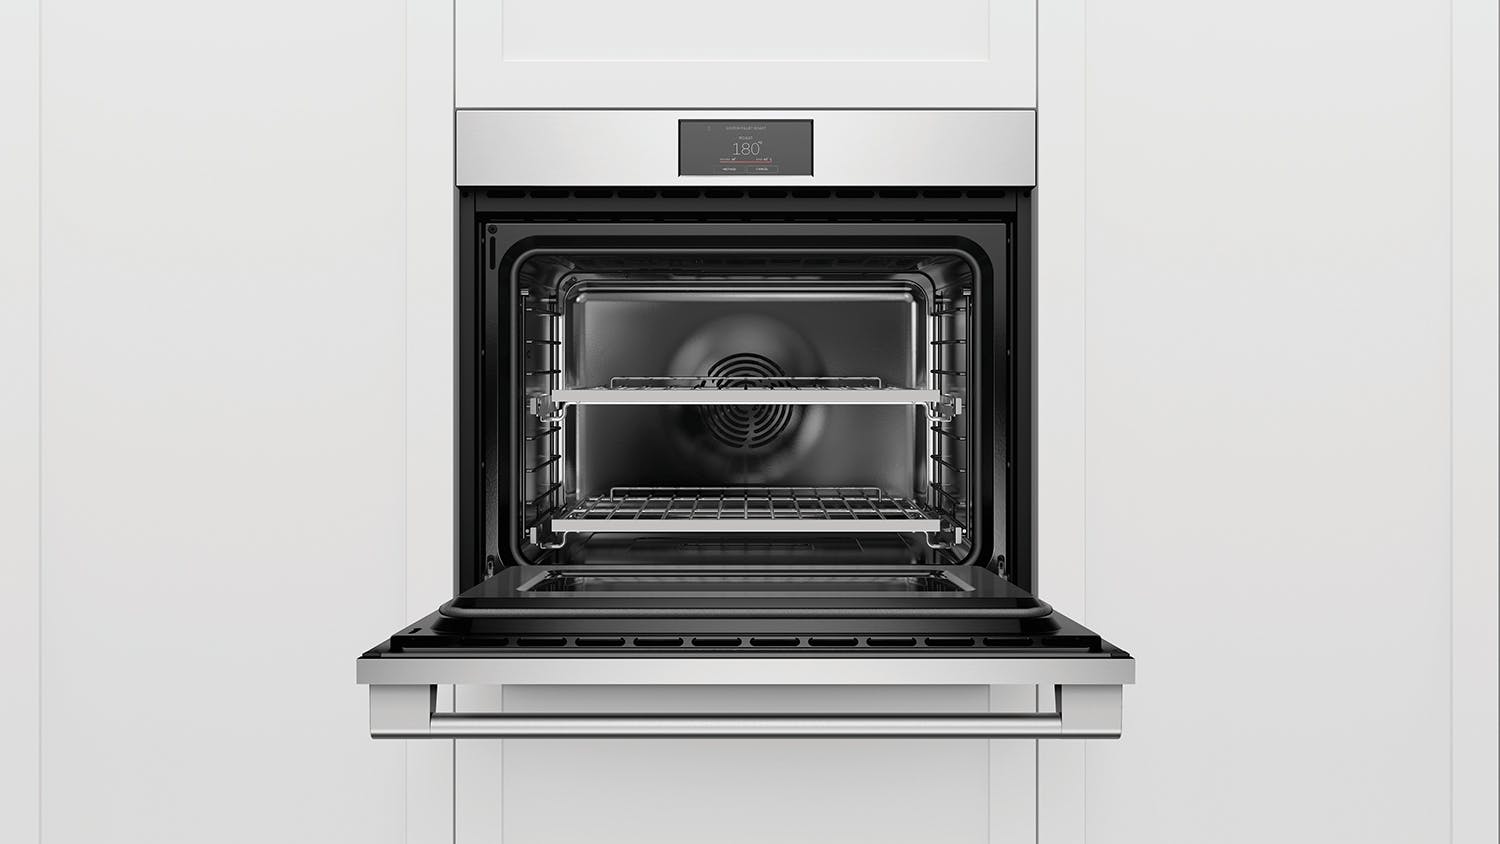 Fisher & Paykel 76CM 17 Function Pyrolytic Built-in Oven - Stainless Steel